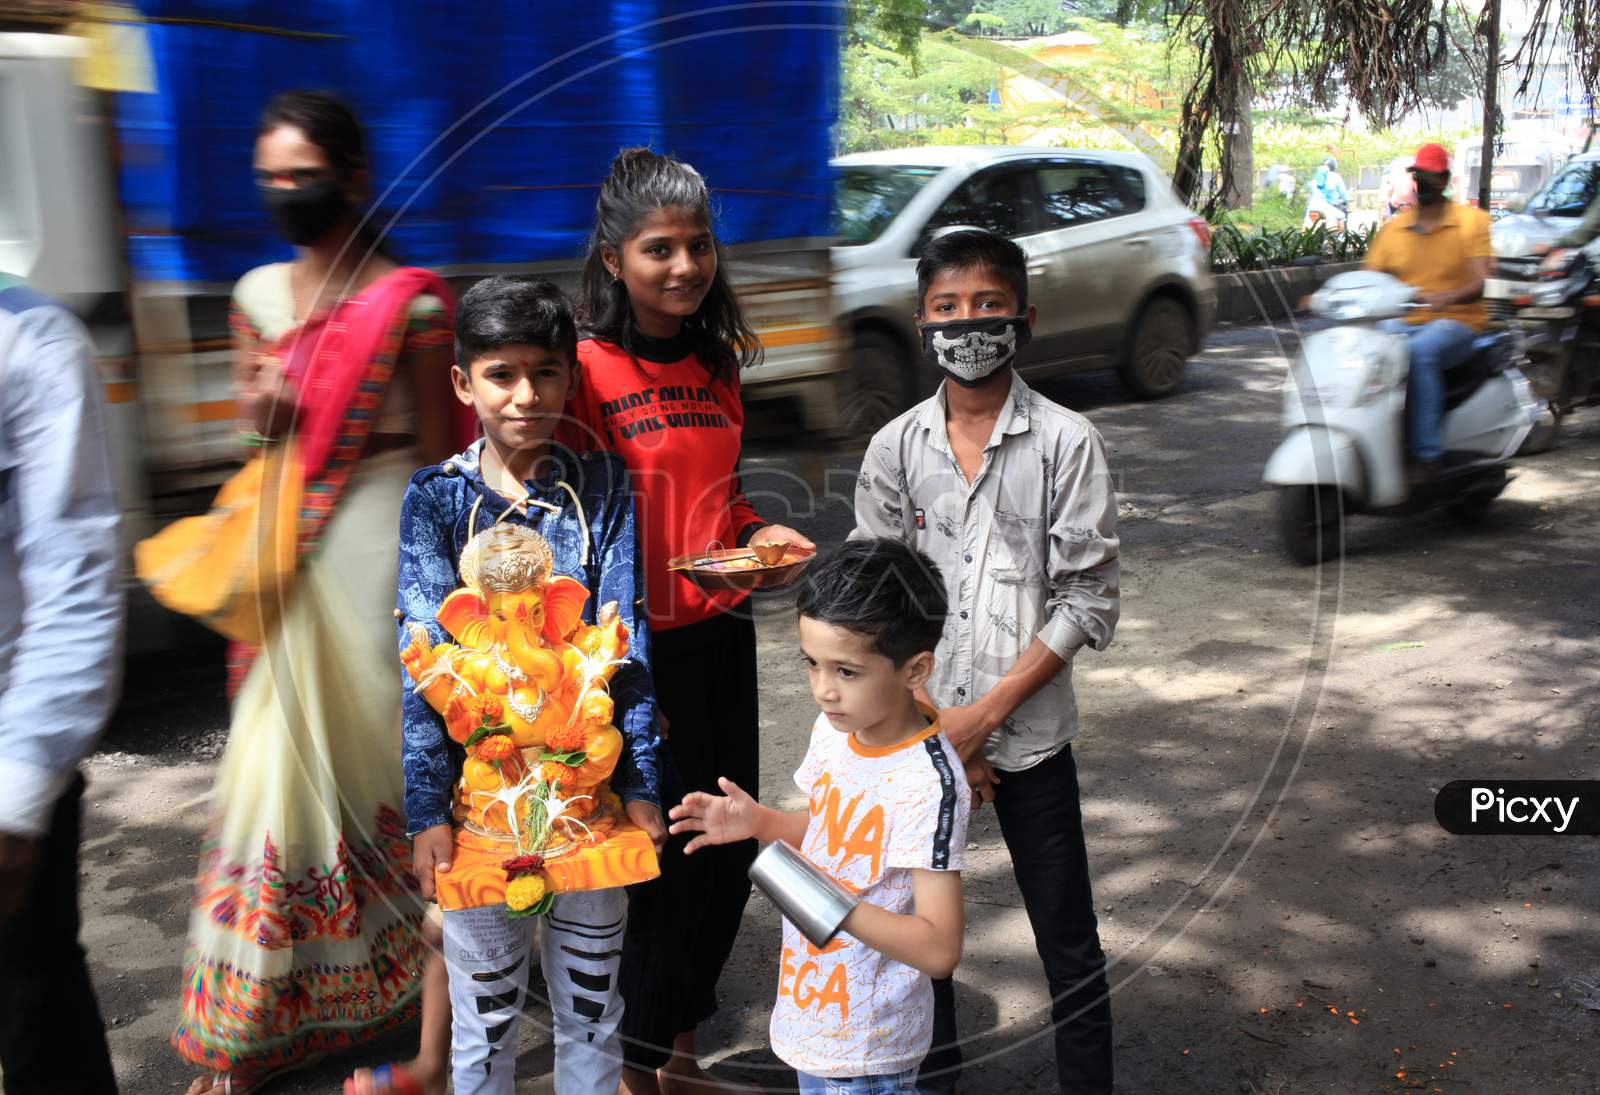 A Gang Of Children Taking Lord Ganesha To The Local Designated Tank For The Annual Immersion Ritual. This Marks The End To The 10 Day Ganpati Festival.